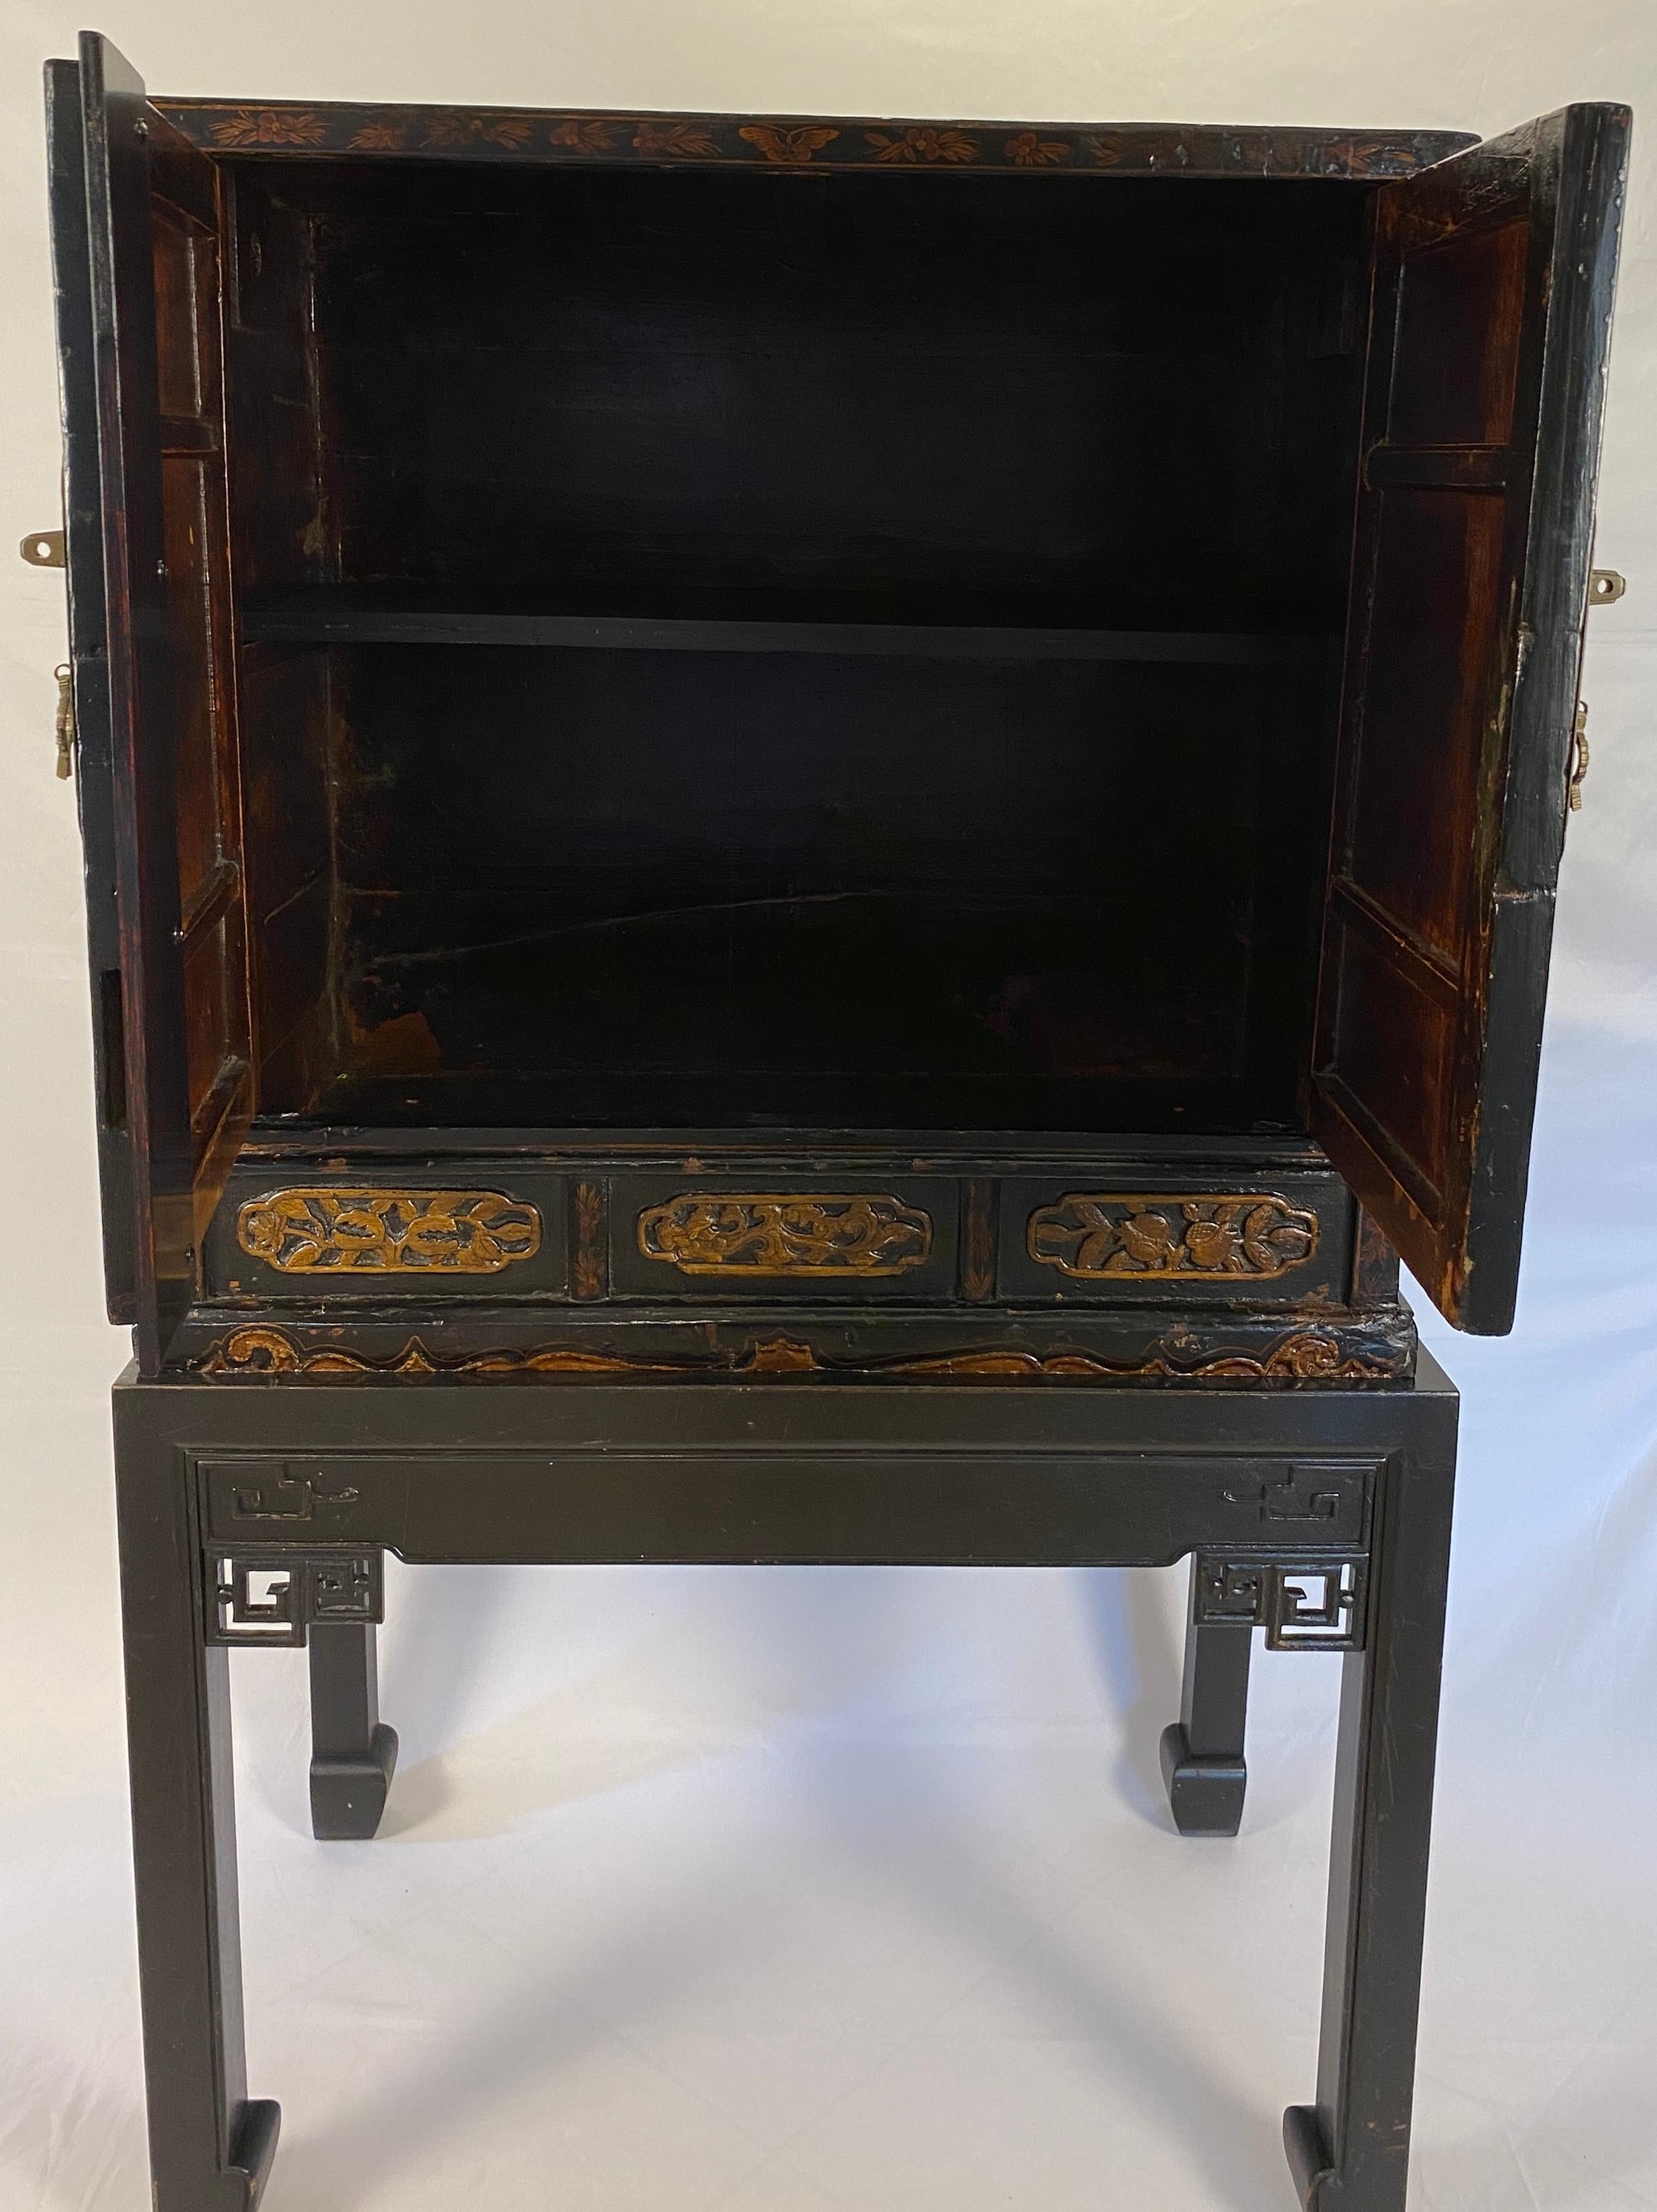 Chinese Red Lacquered Qing Dynasty 19th Century Dry Bar Cabinet (19. Jahrhundert) im Angebot